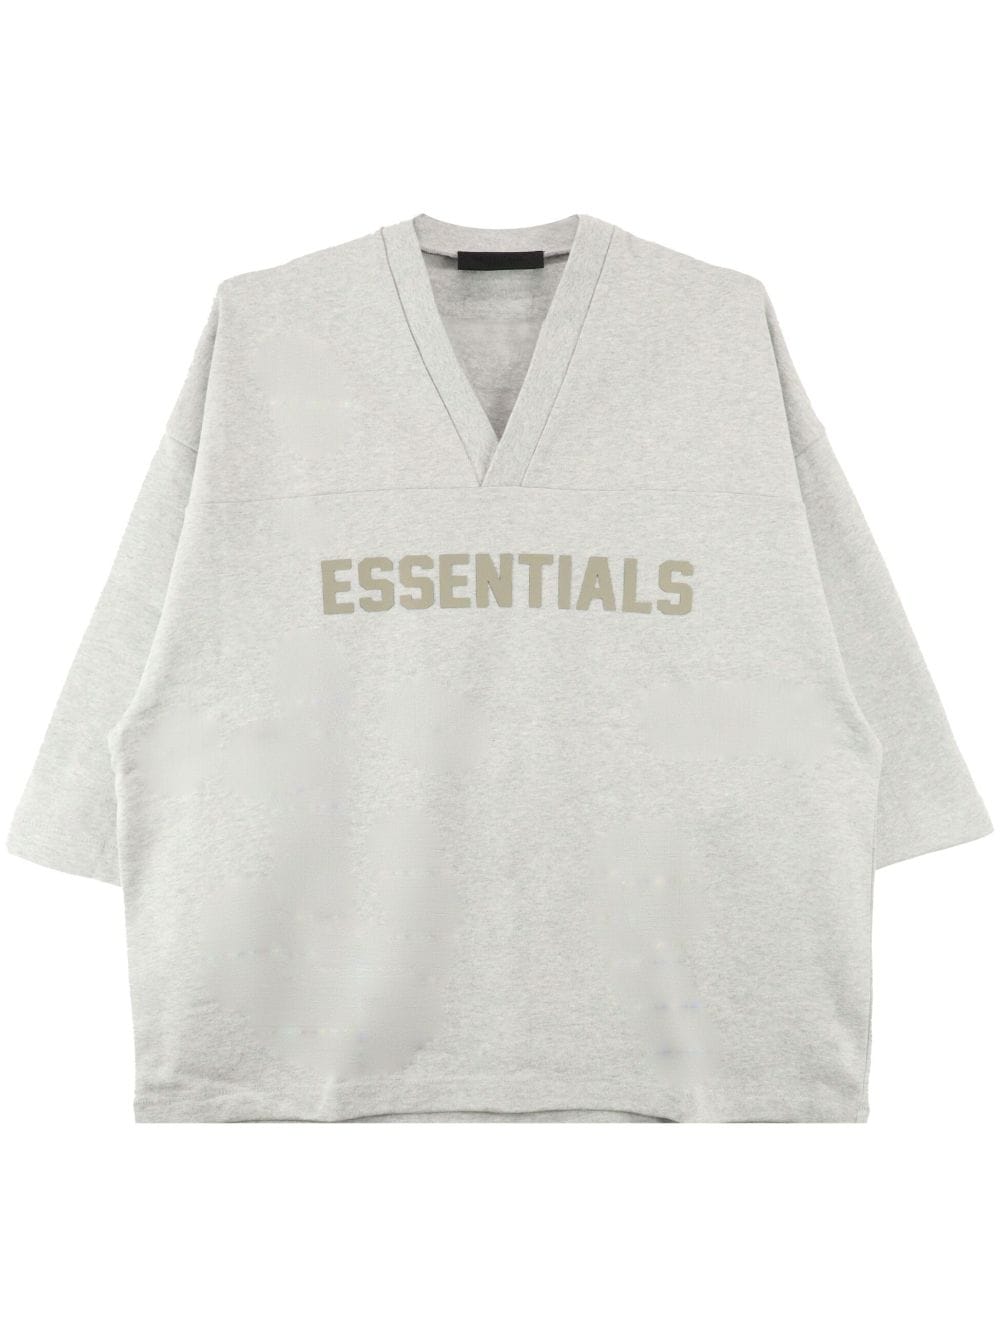 FEAR OF GOD ESSENTIALS logo-embossed cotton T-shirt - Grey von FEAR OF GOD ESSENTIALS